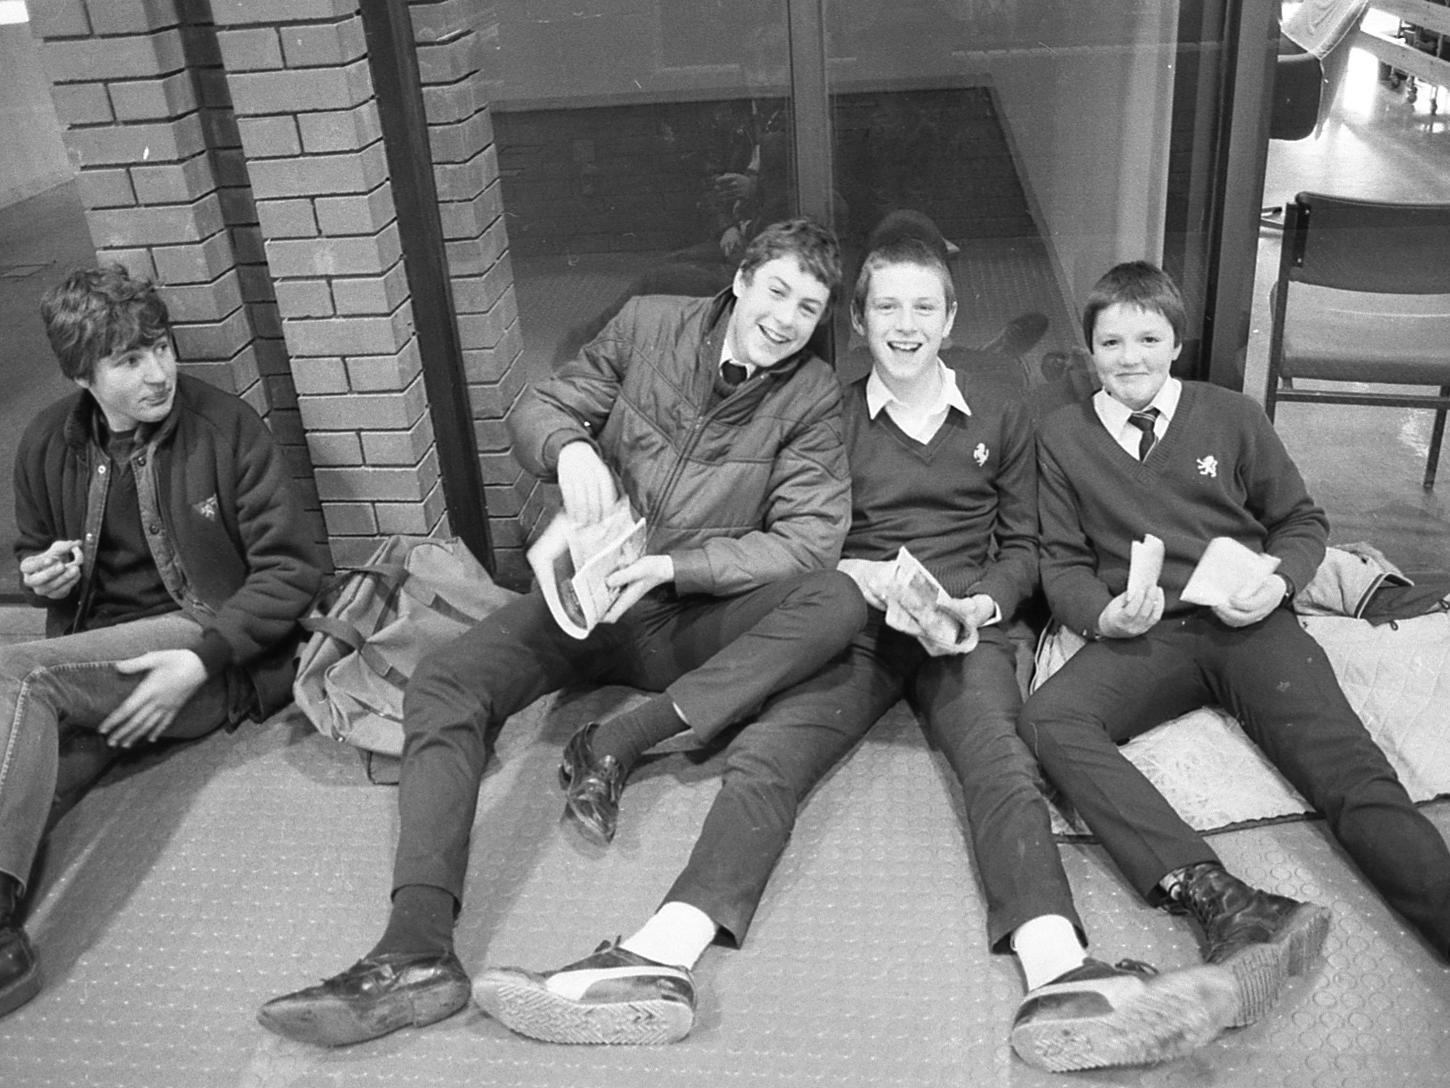 Four youngsters relaxing enjoying their chips